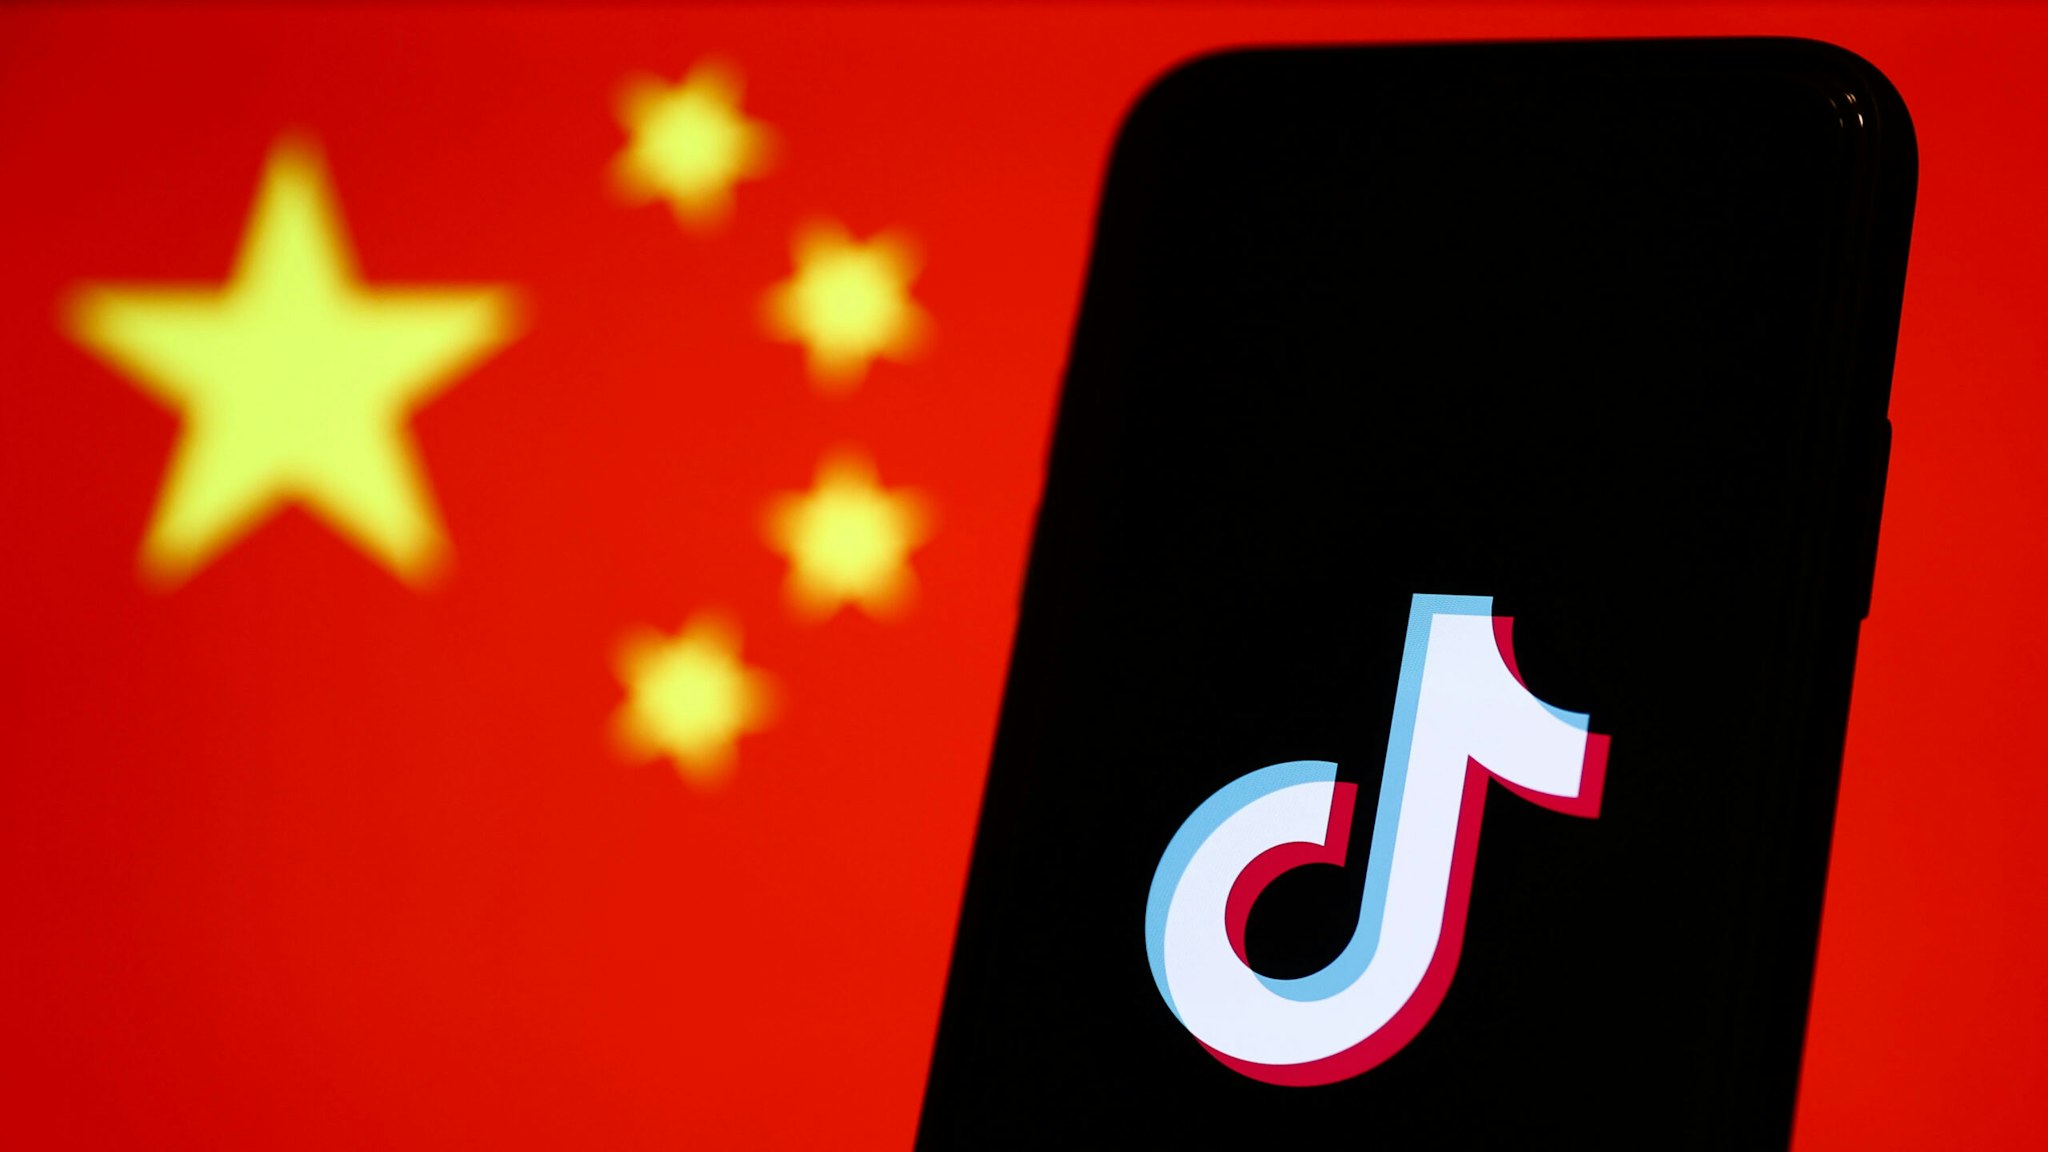 TikTok logo displayed on a phone screen and Chinese flag displayed on a screen in the background are seen in this illustration photo taken in Krakow, Poland on January 30, 2023.